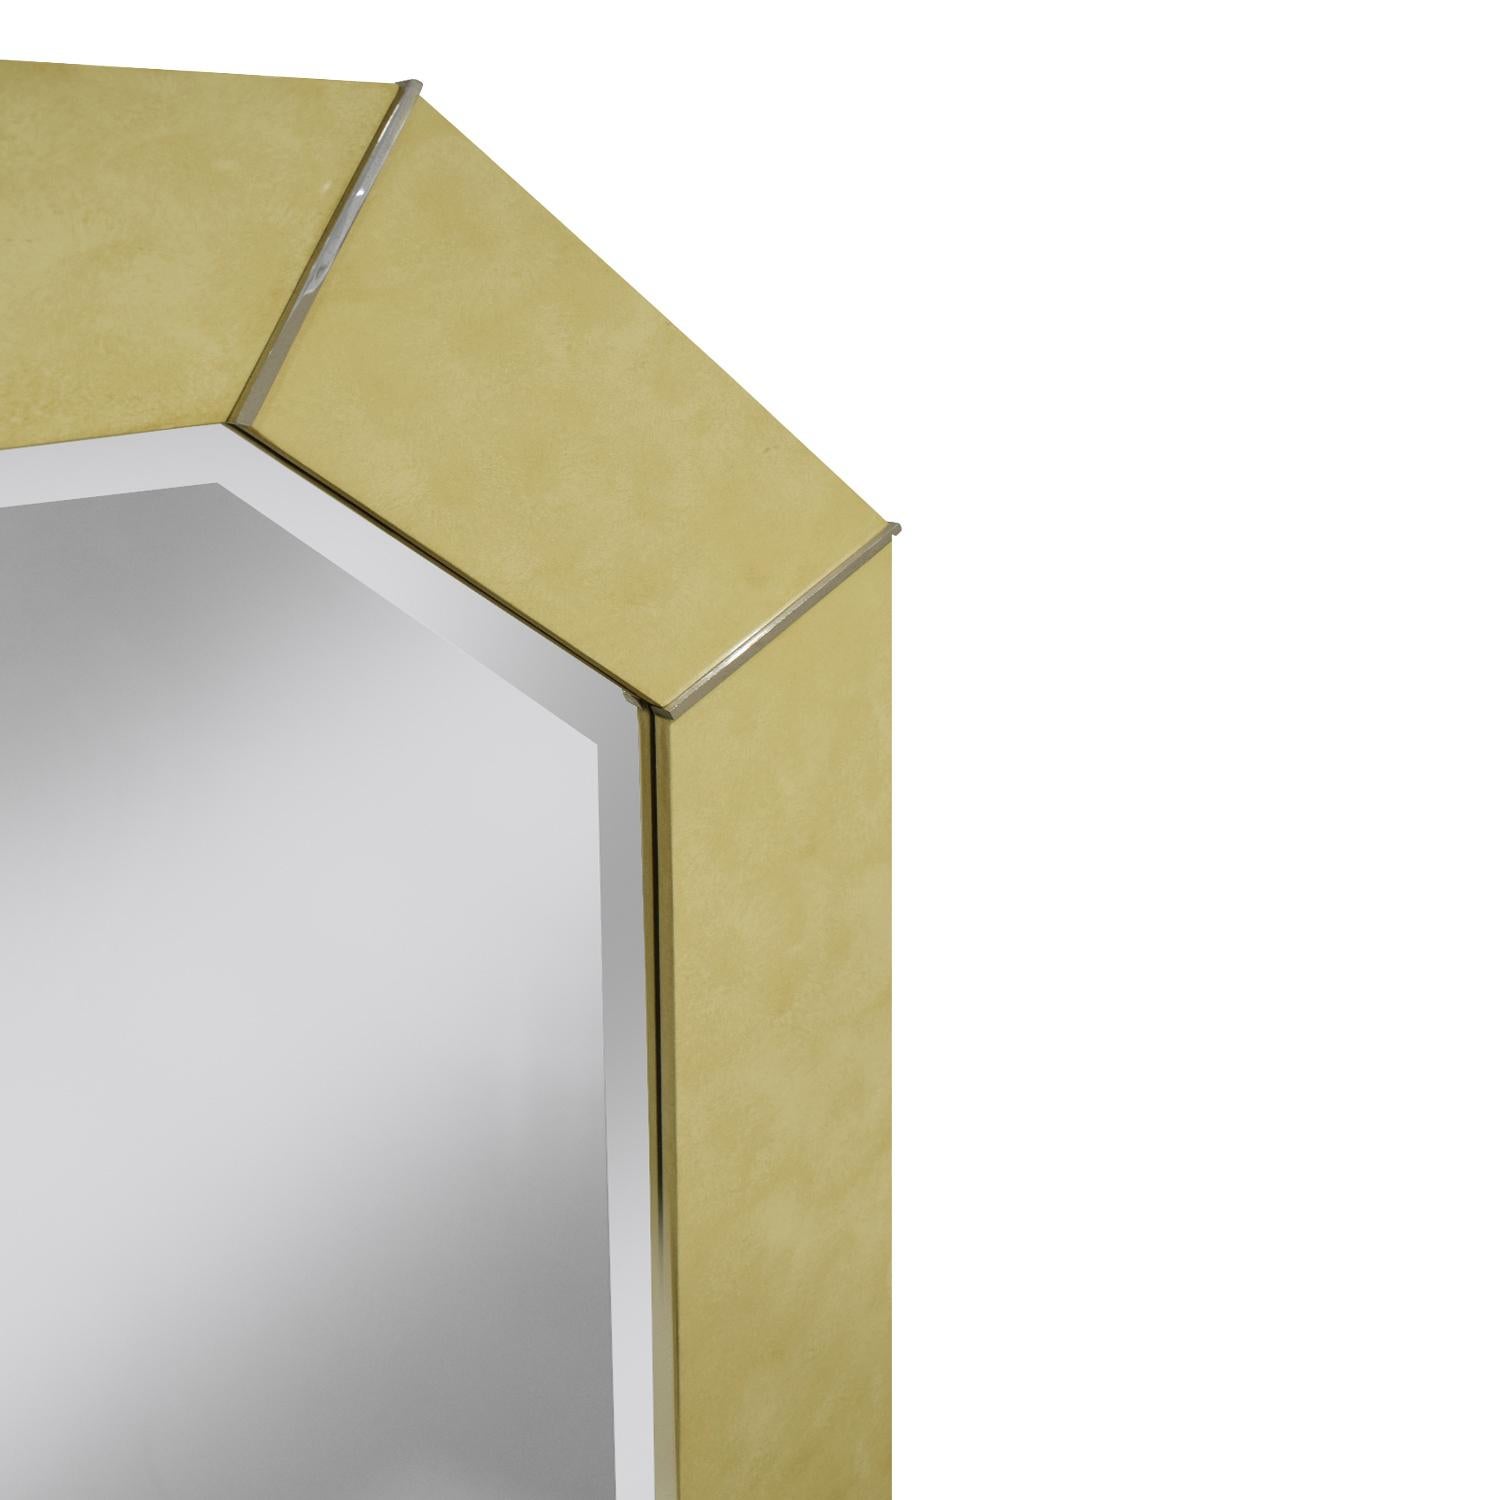 North American Karl Springer Octagonal Mirror in Ivory Lacquer with Chrome Accents, 1970s For Sale